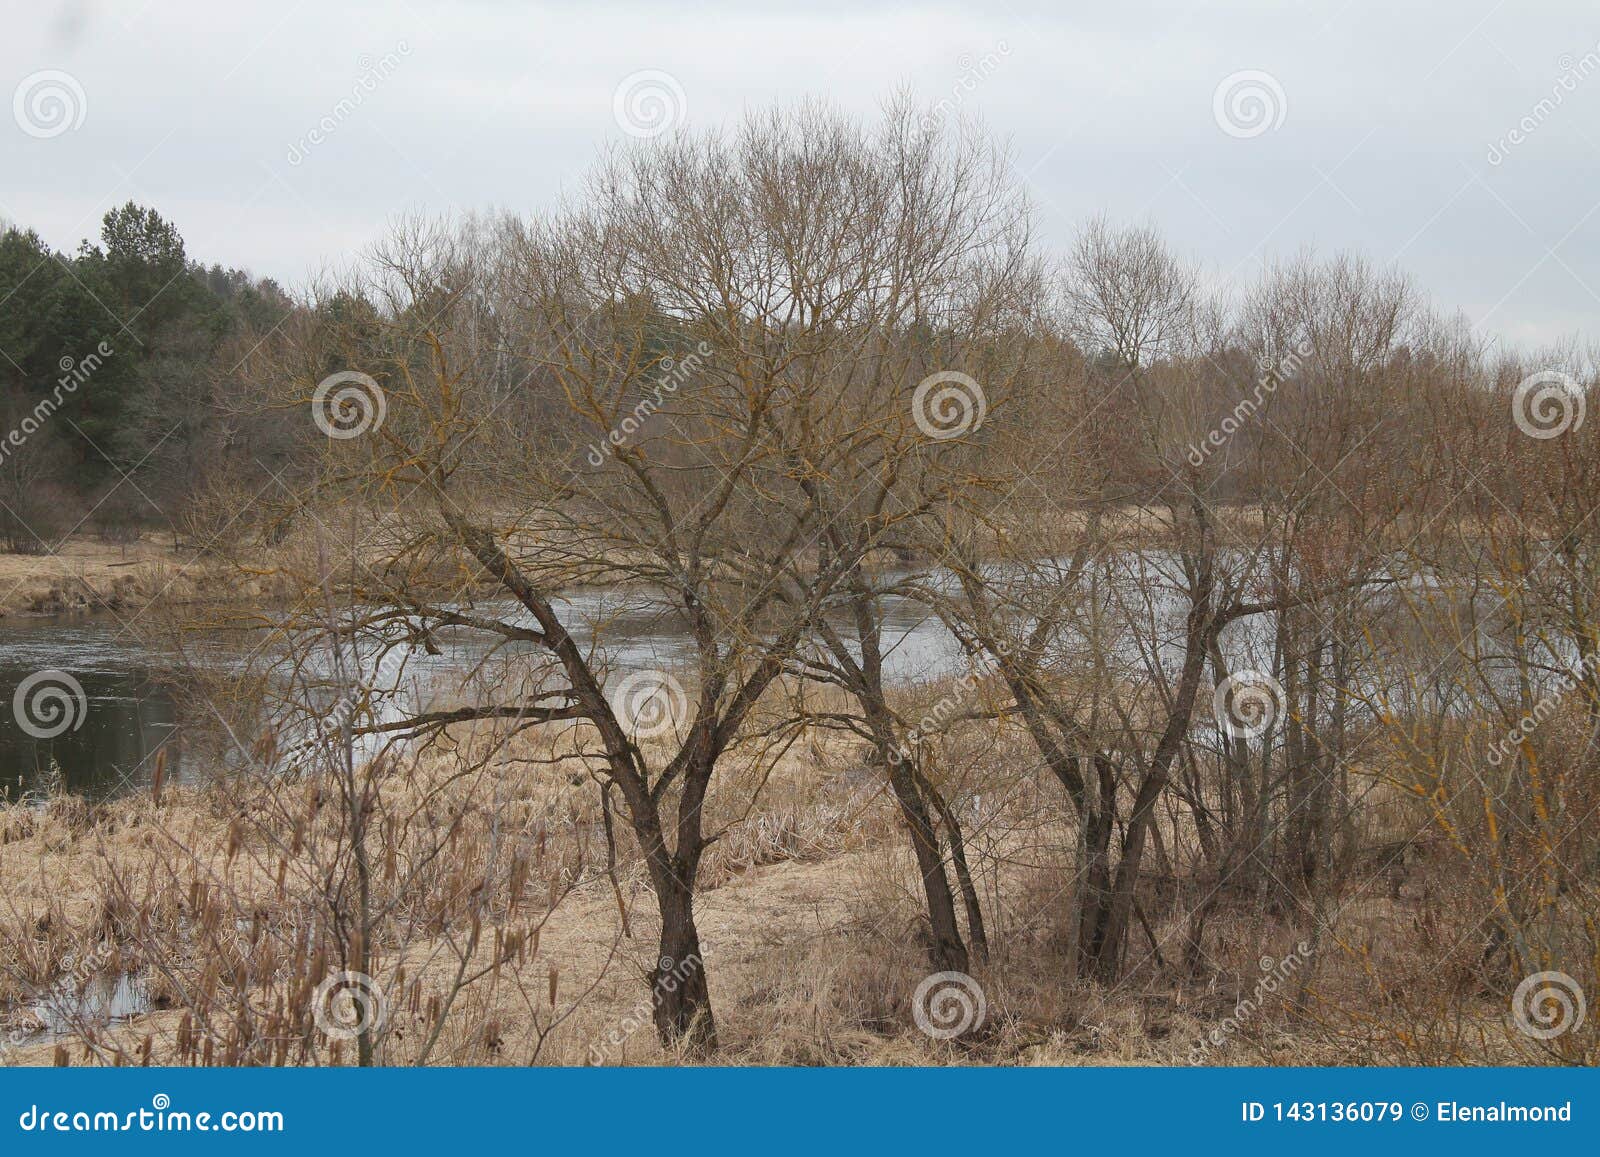 First day of spring stock image. Image of europe, harmony 143136079